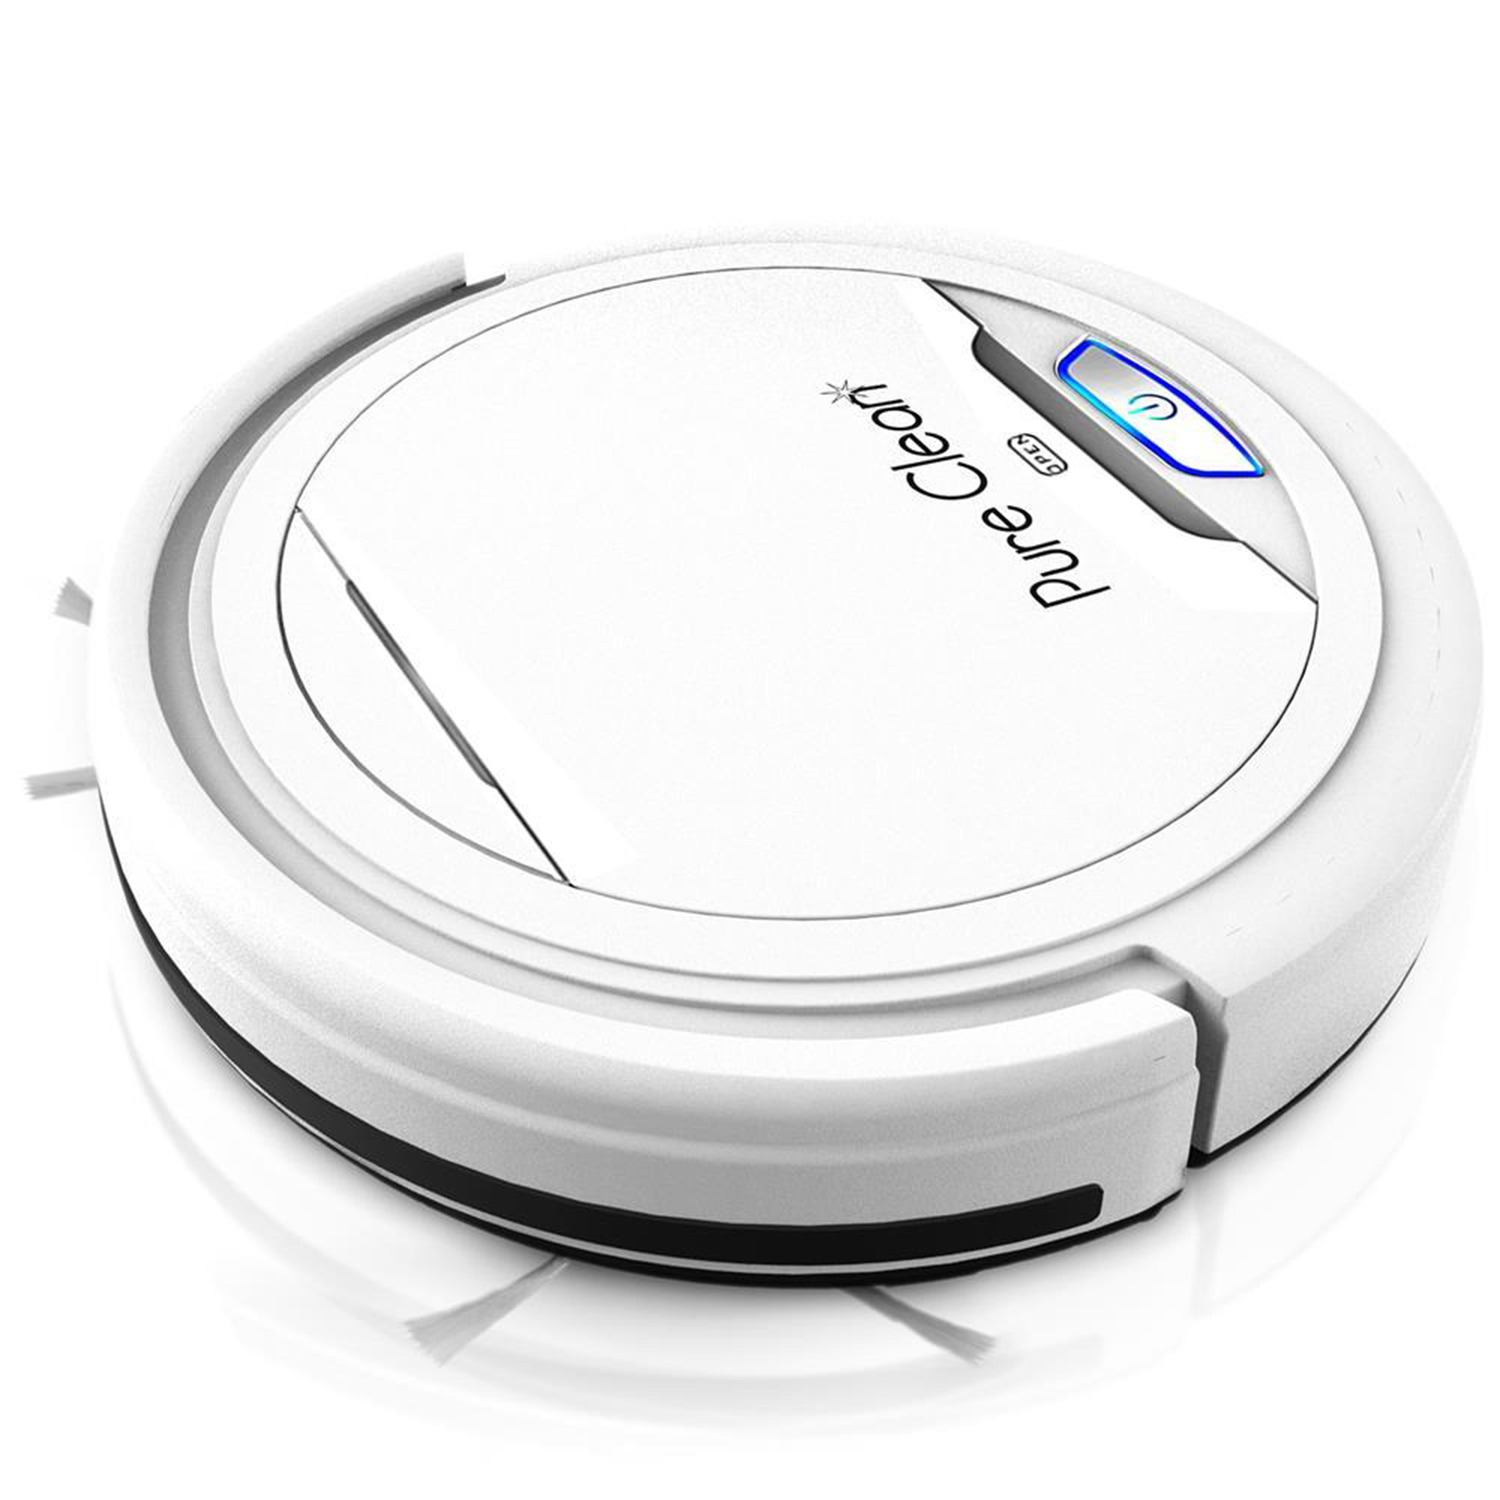 Pyle PureClean Smart Automatic Robot Vacuum Powerful Home Cleaning System, White - image 1 of 9